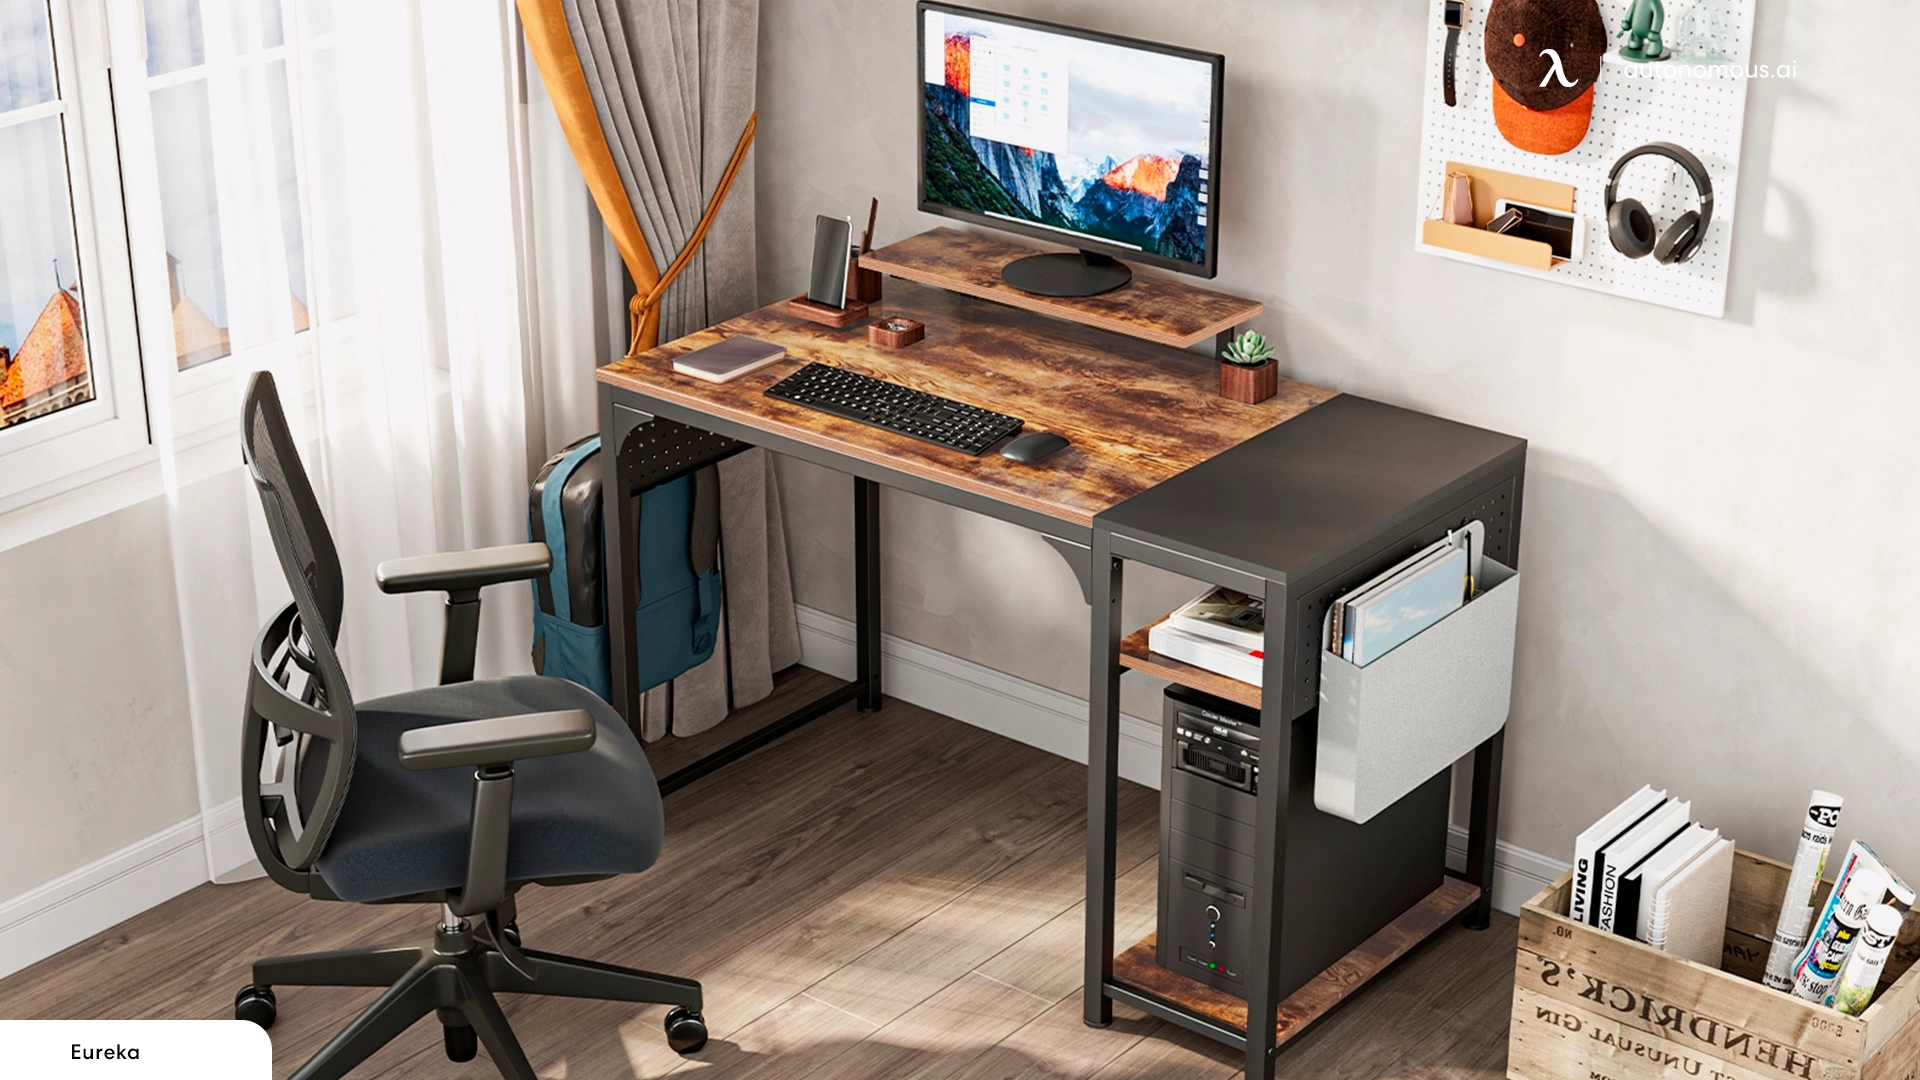 Which Size of Desk Should You Choose for a Small Office?